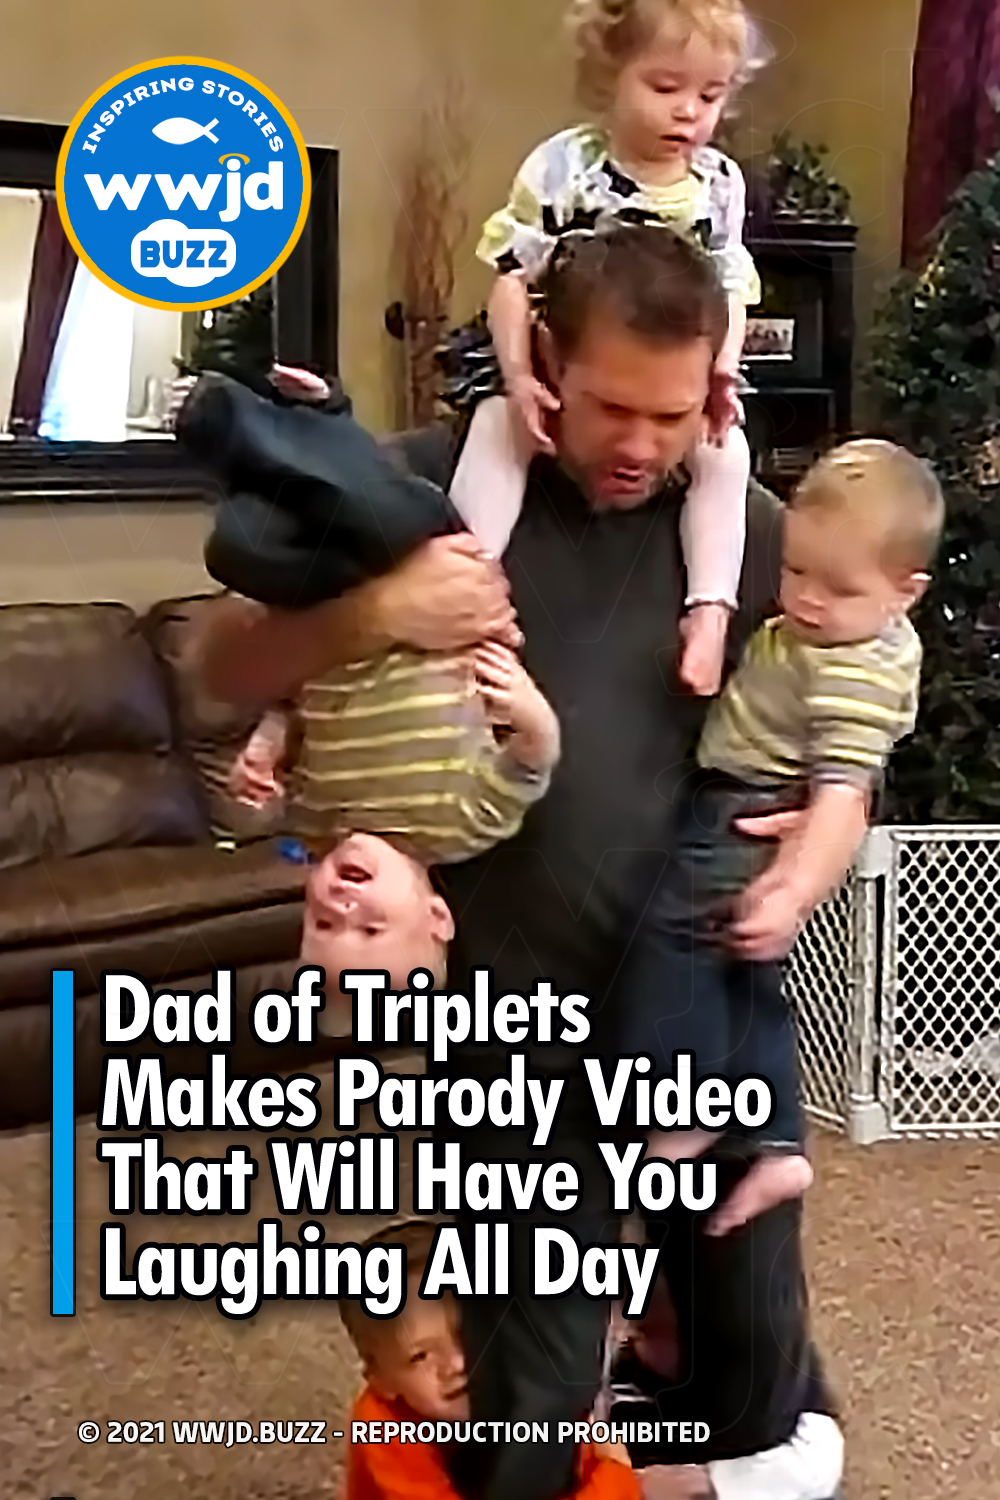 Dad of Triplets Makes Parody Video That Will Have You Laughing All Day